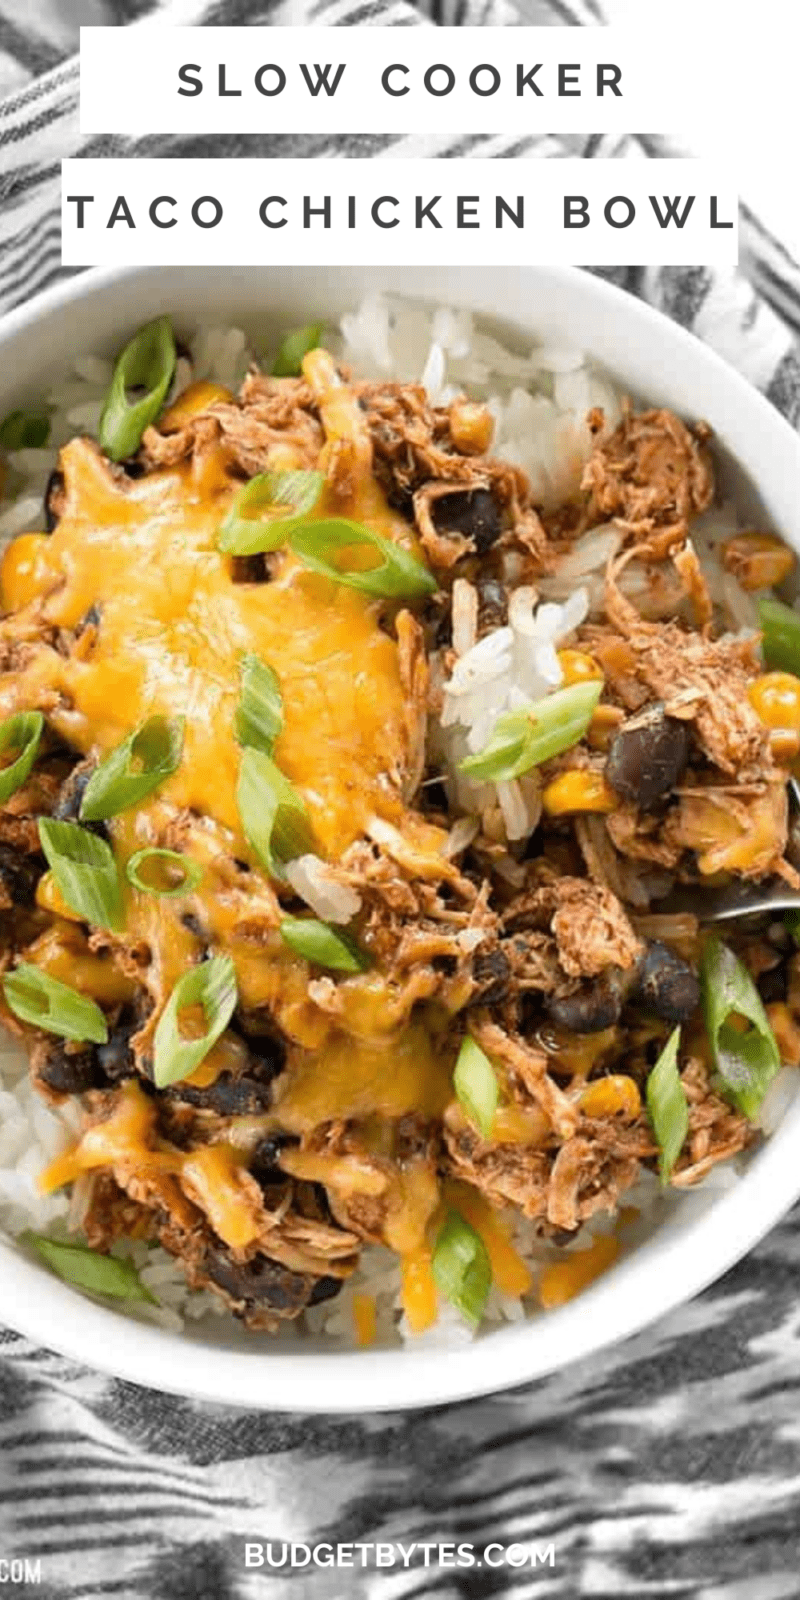 https://www.budgetbytes.com/wp-content/uploads/2011/07/Slow-Cooker-Taco-Chicken-Bowls-1-800x1600.png